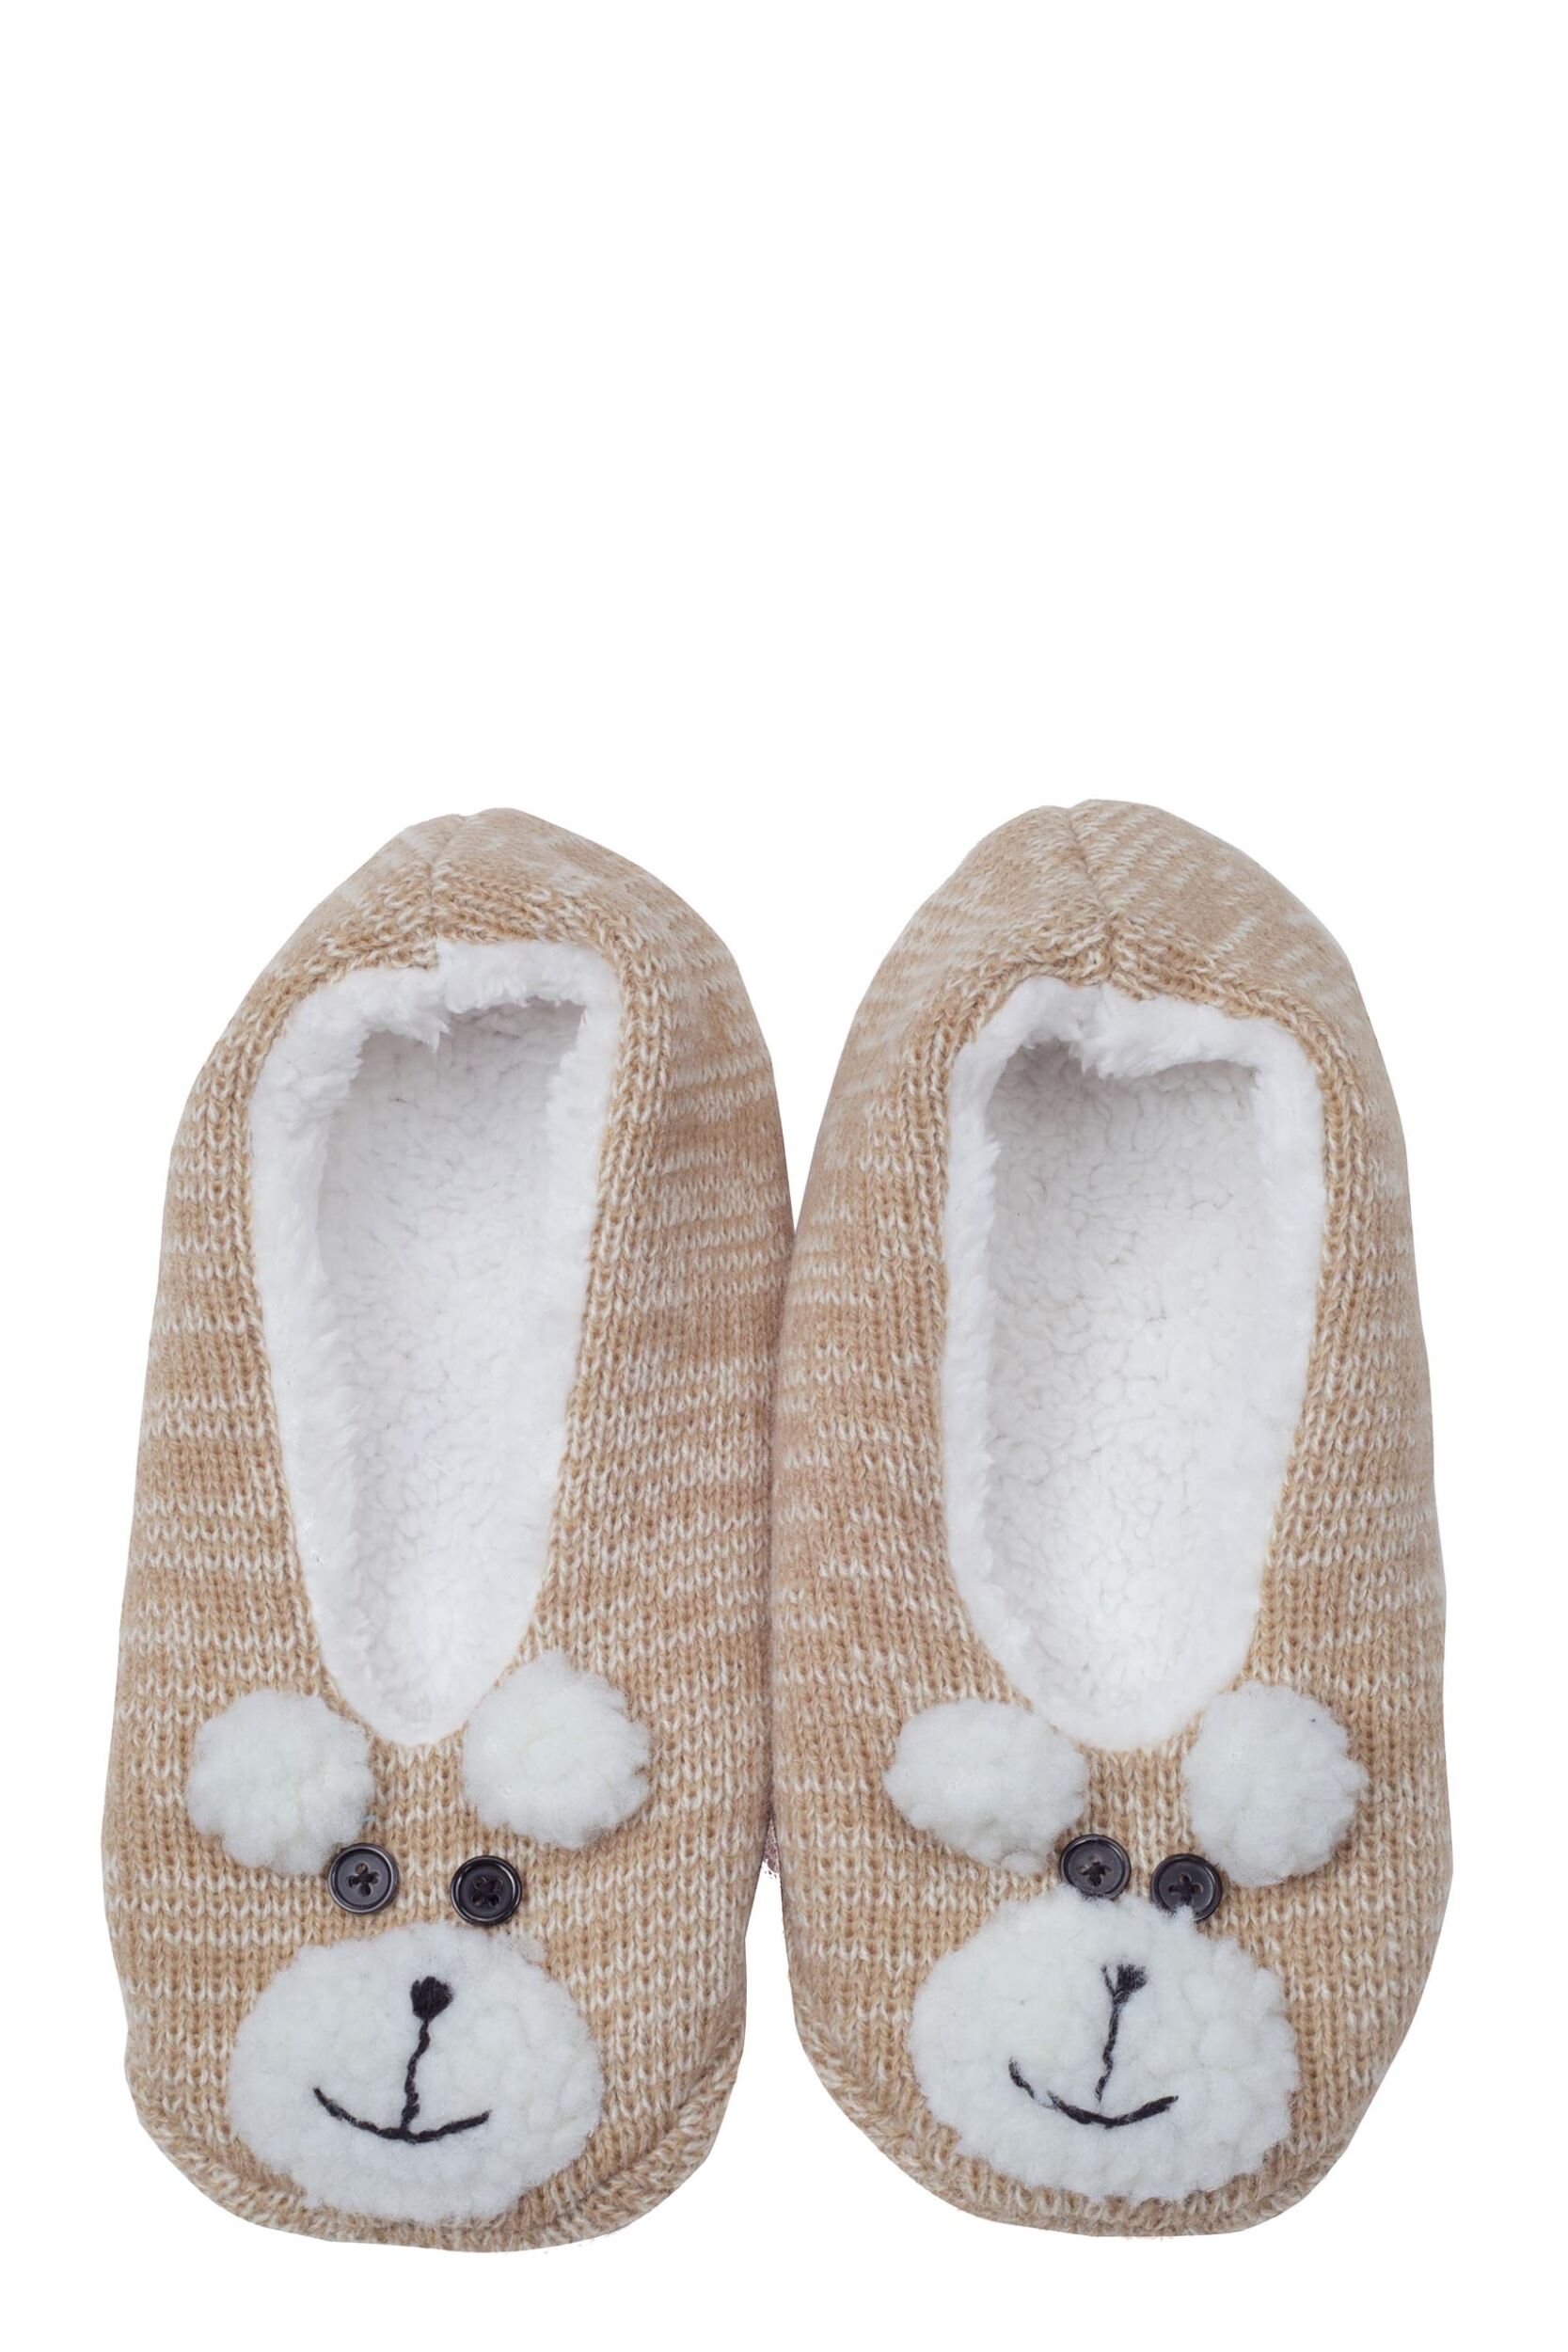 Ladies 1 Pair Totes Novelty Footsie Slippers with Supersoft Lining | eBay